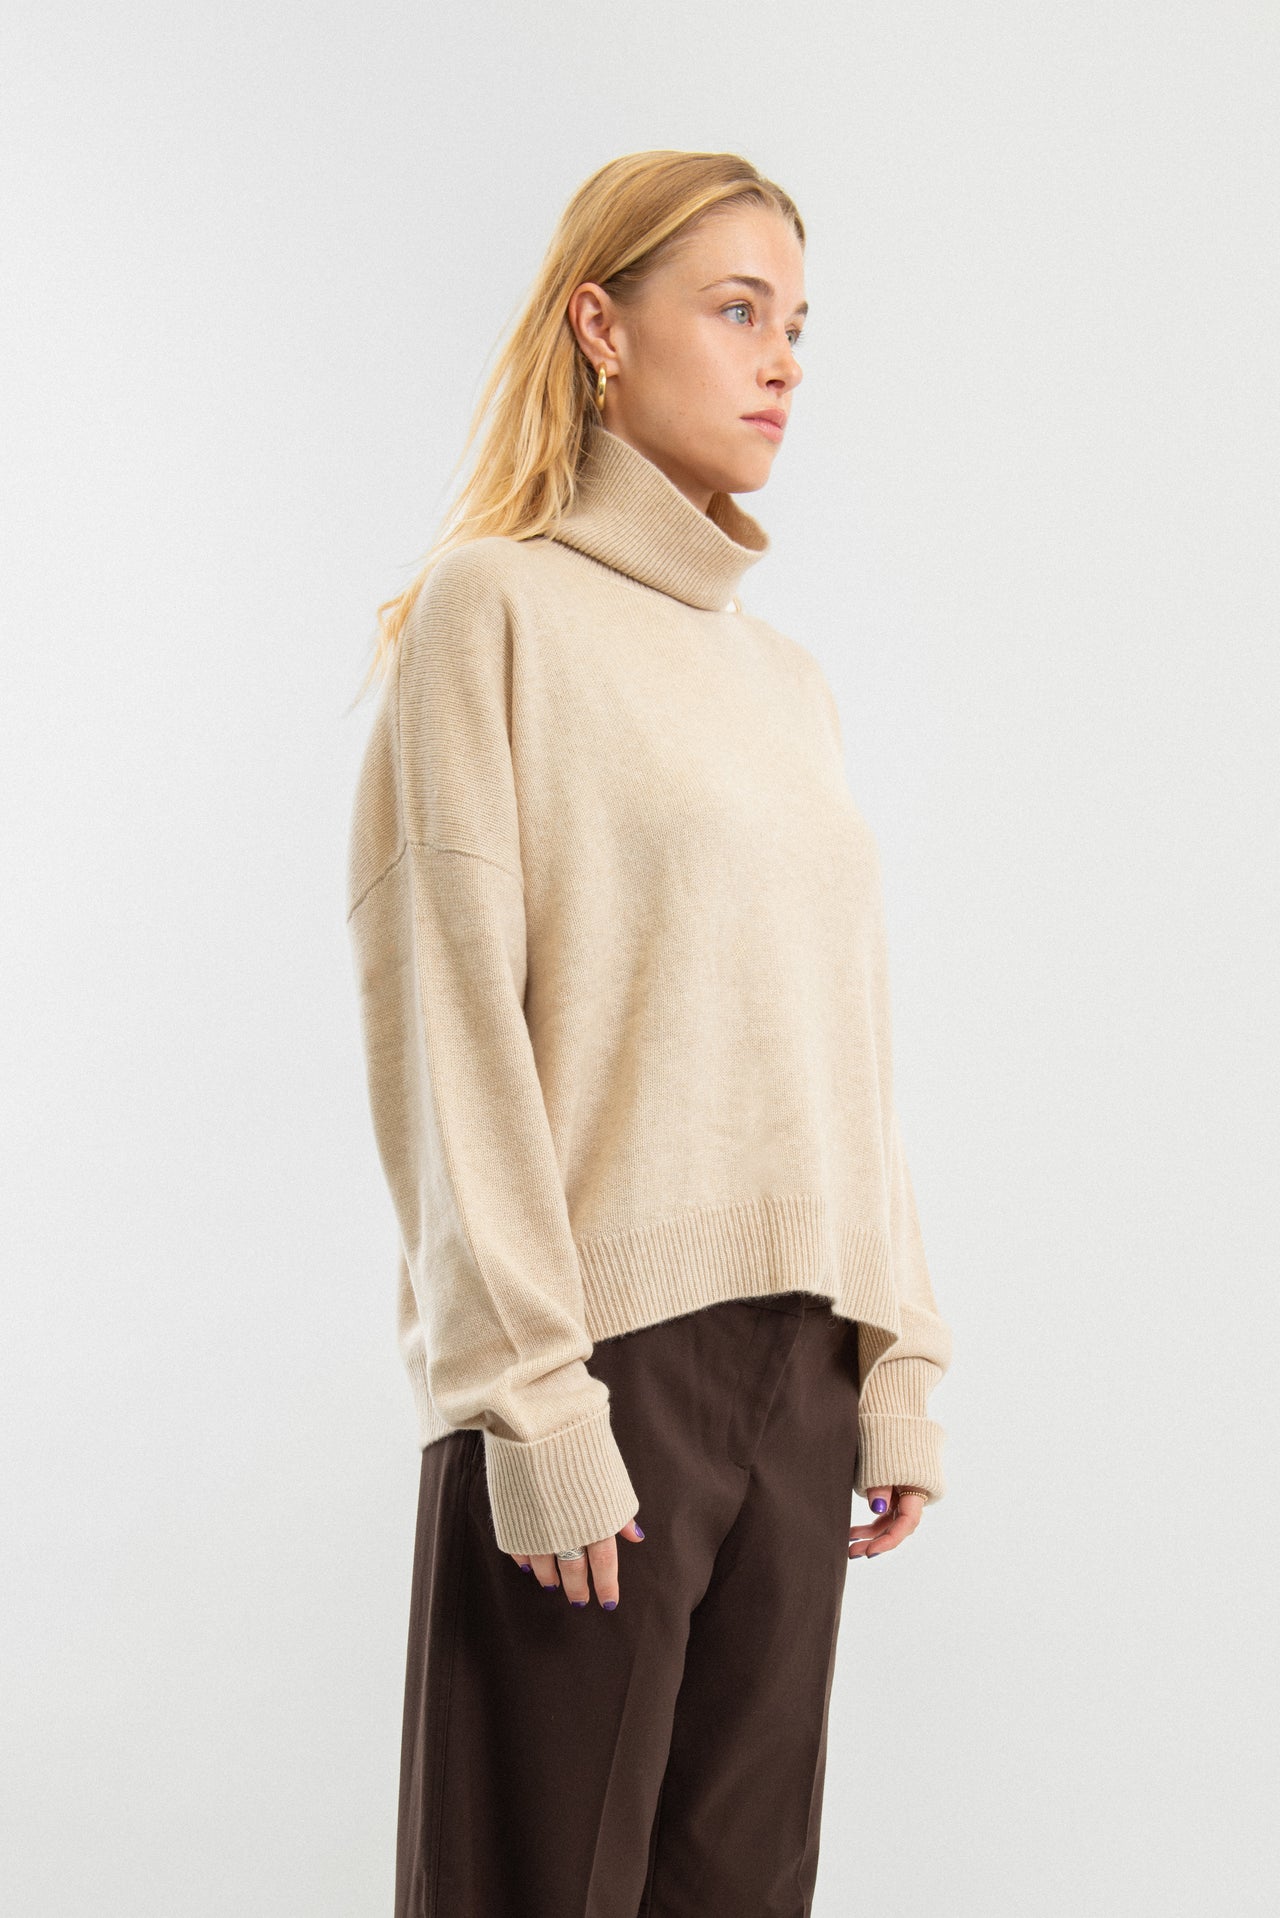 100% Cashmere slightly cropped turtle-neck sweater